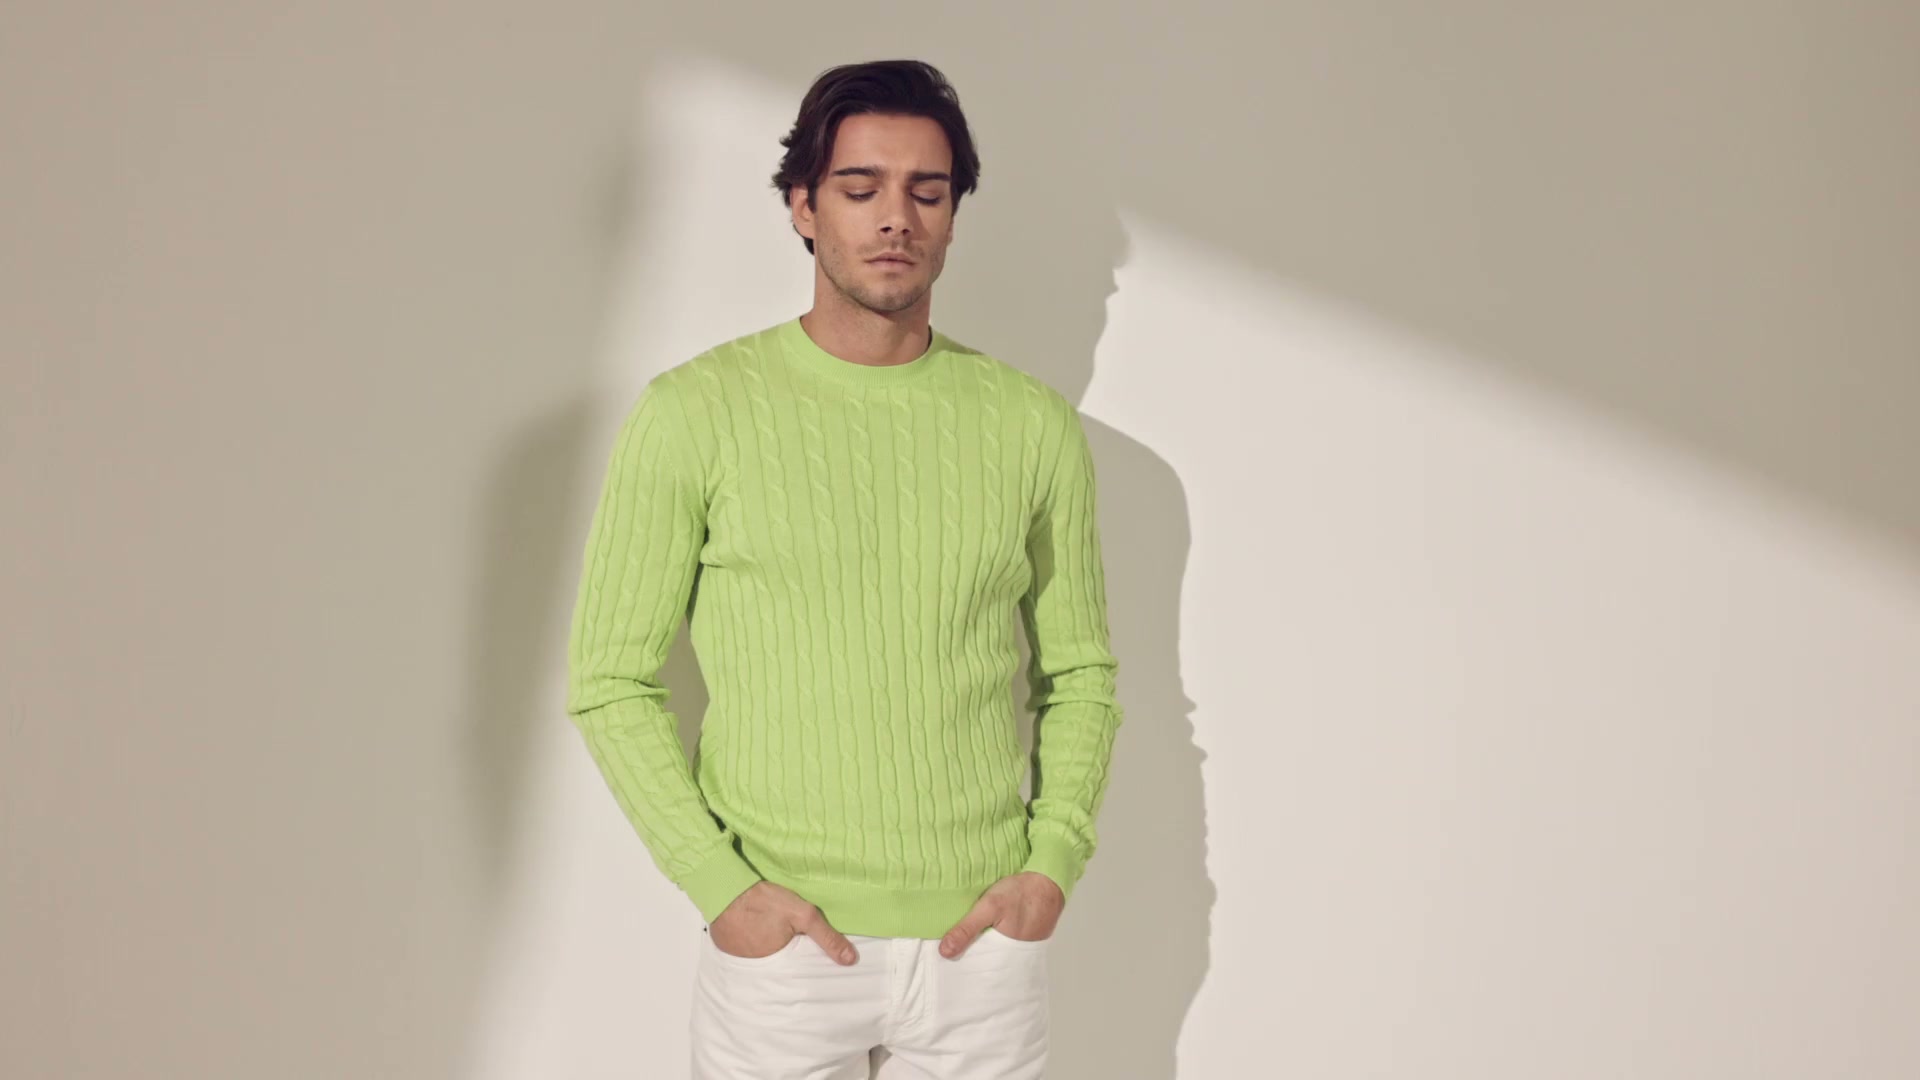 S. Moritz Official Online Store| Knitwear Made in Italy